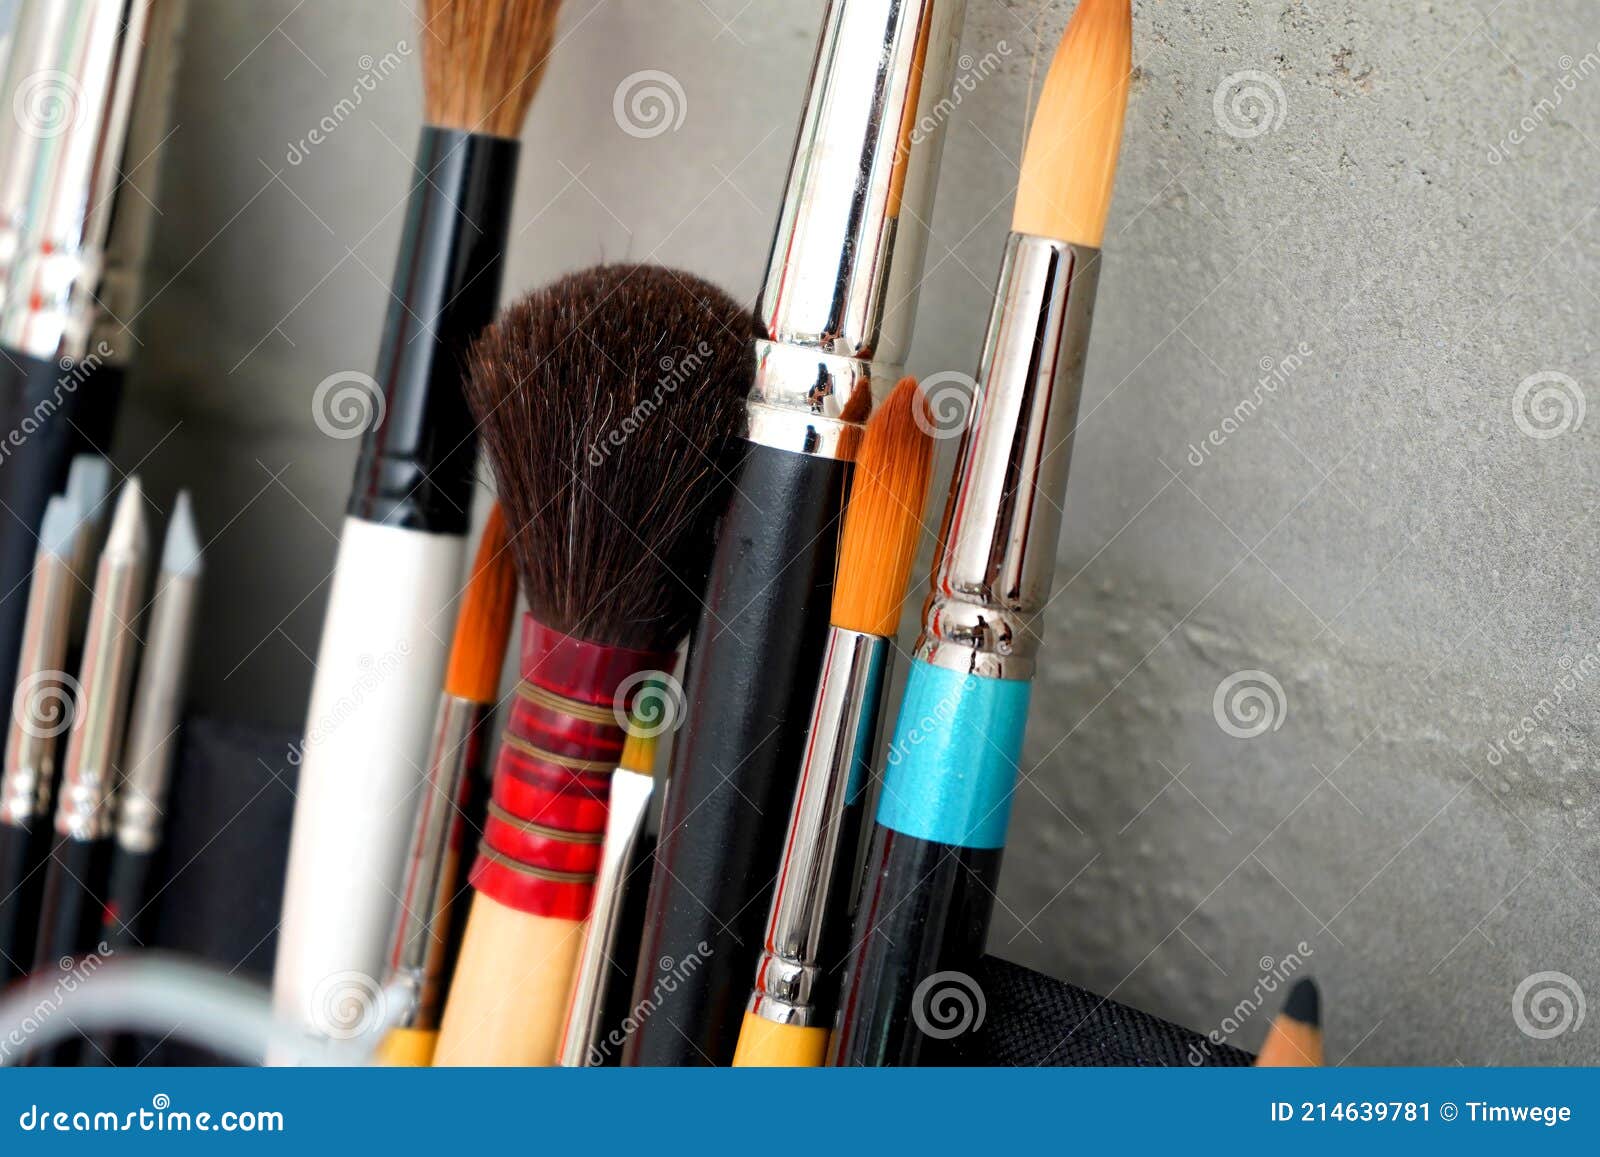 detail of paint brushes and bright paint in artistÃ¢â¬â¢s studio